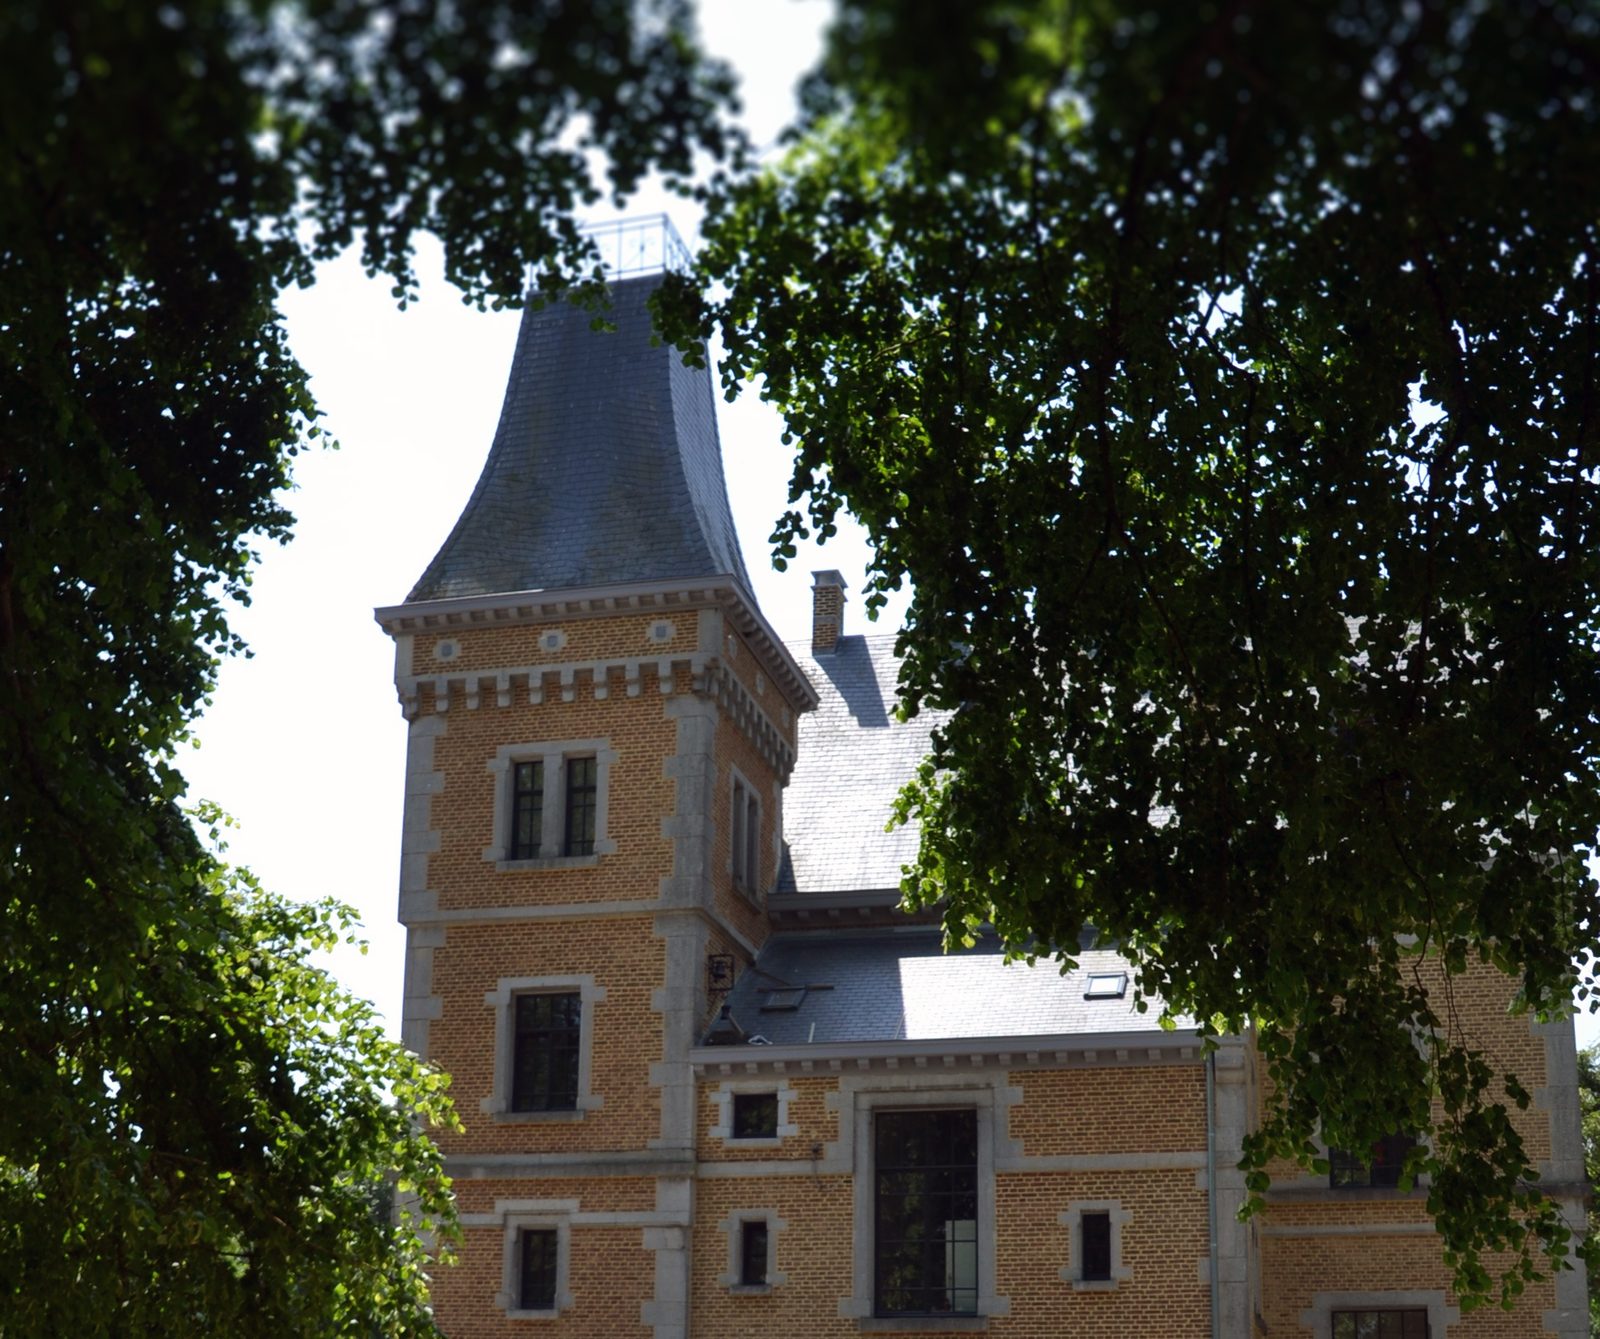 Staying at Chateau Beausaint